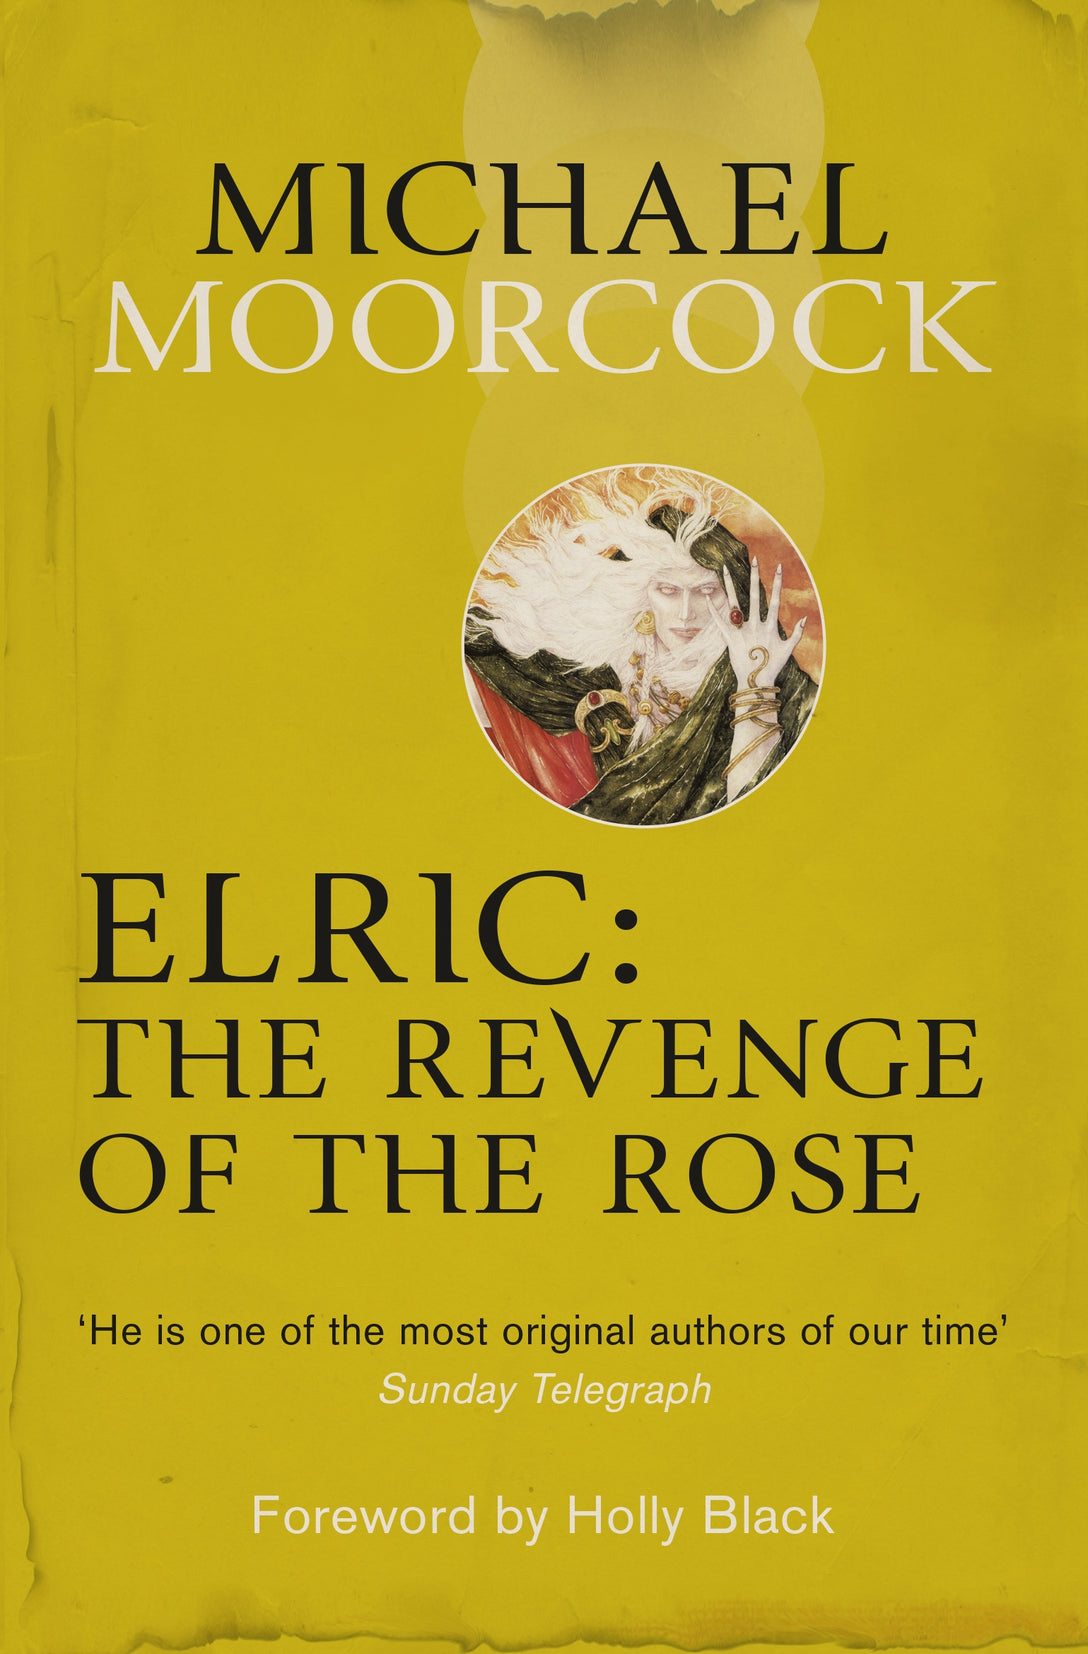 Elric: The Revenge of the Rose by Michael Moorcock